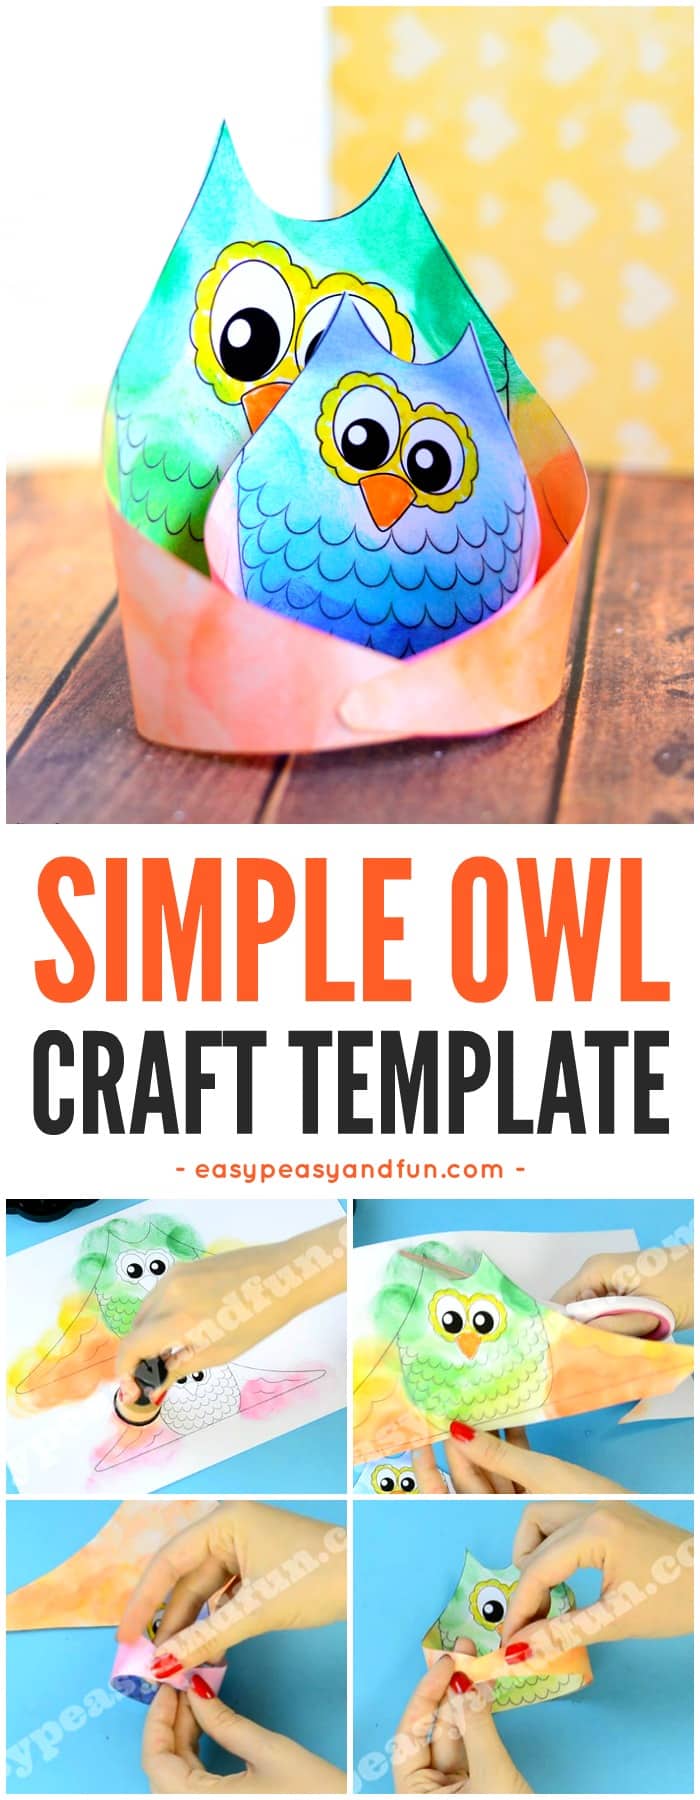 Simple Owl Craft Template for Kids